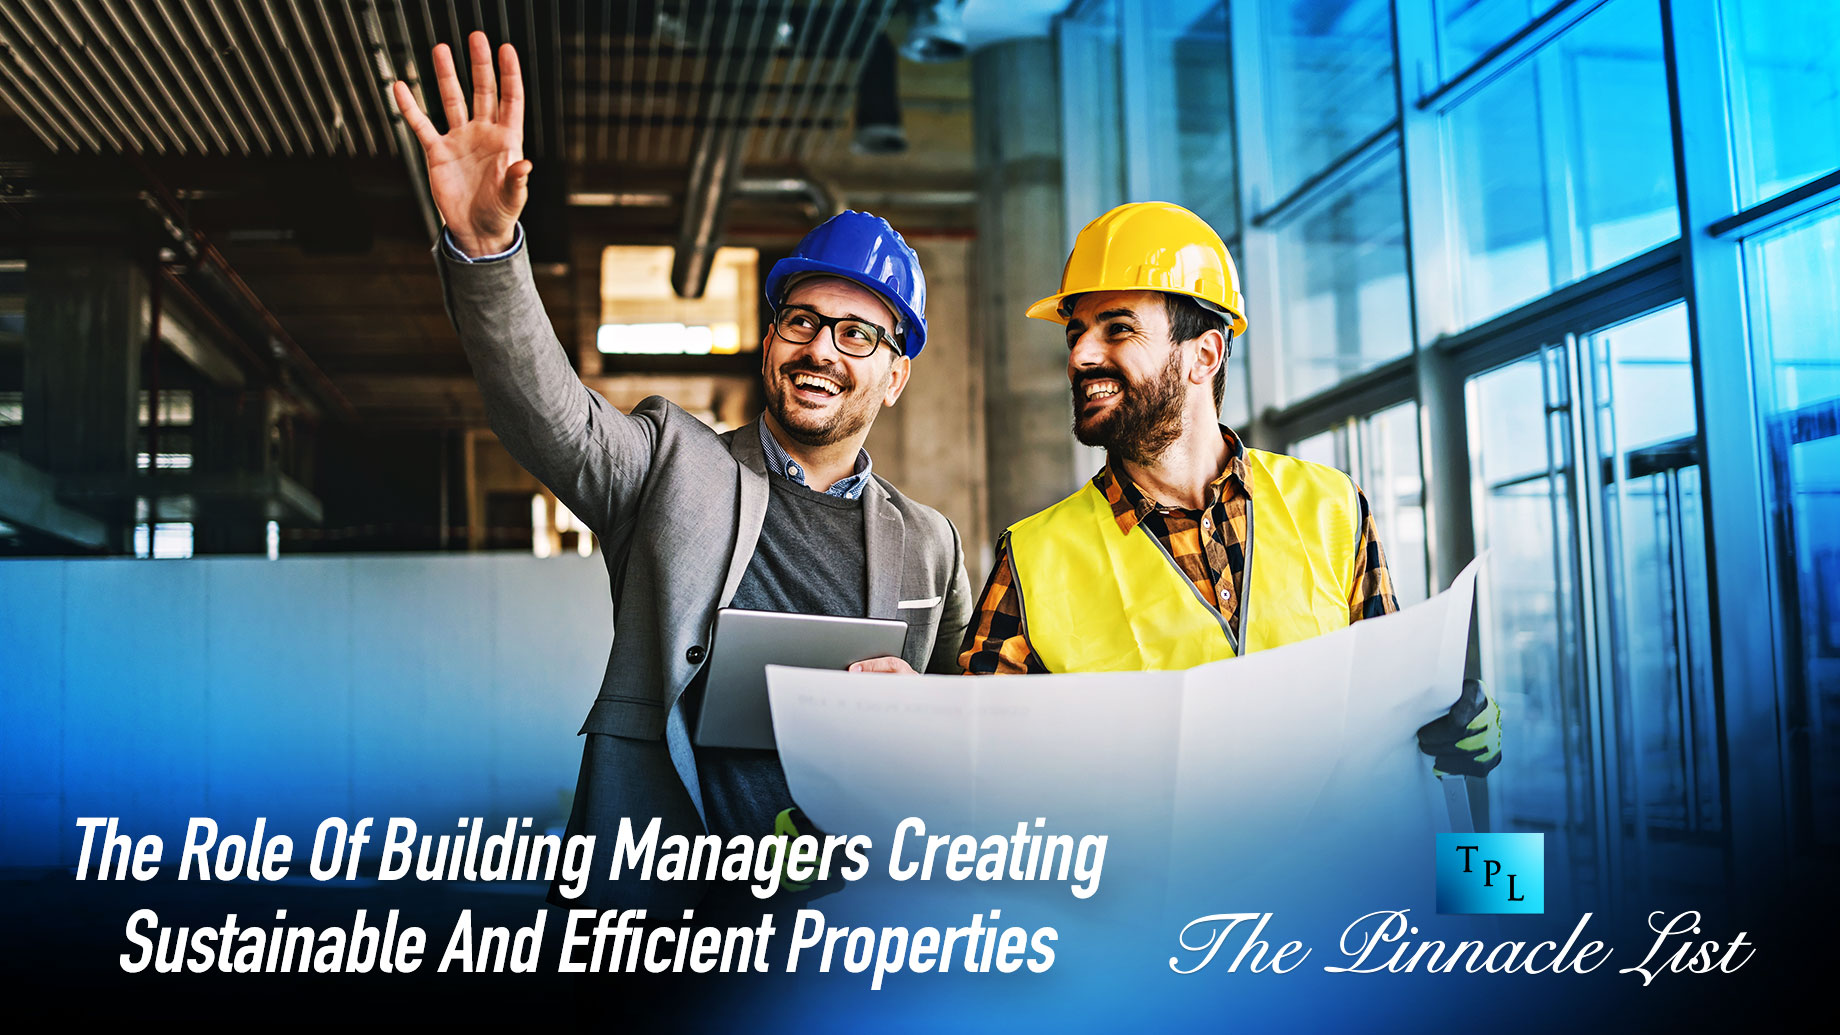 The Role Of Building Managers Creating Sustainable And Efficient Properties